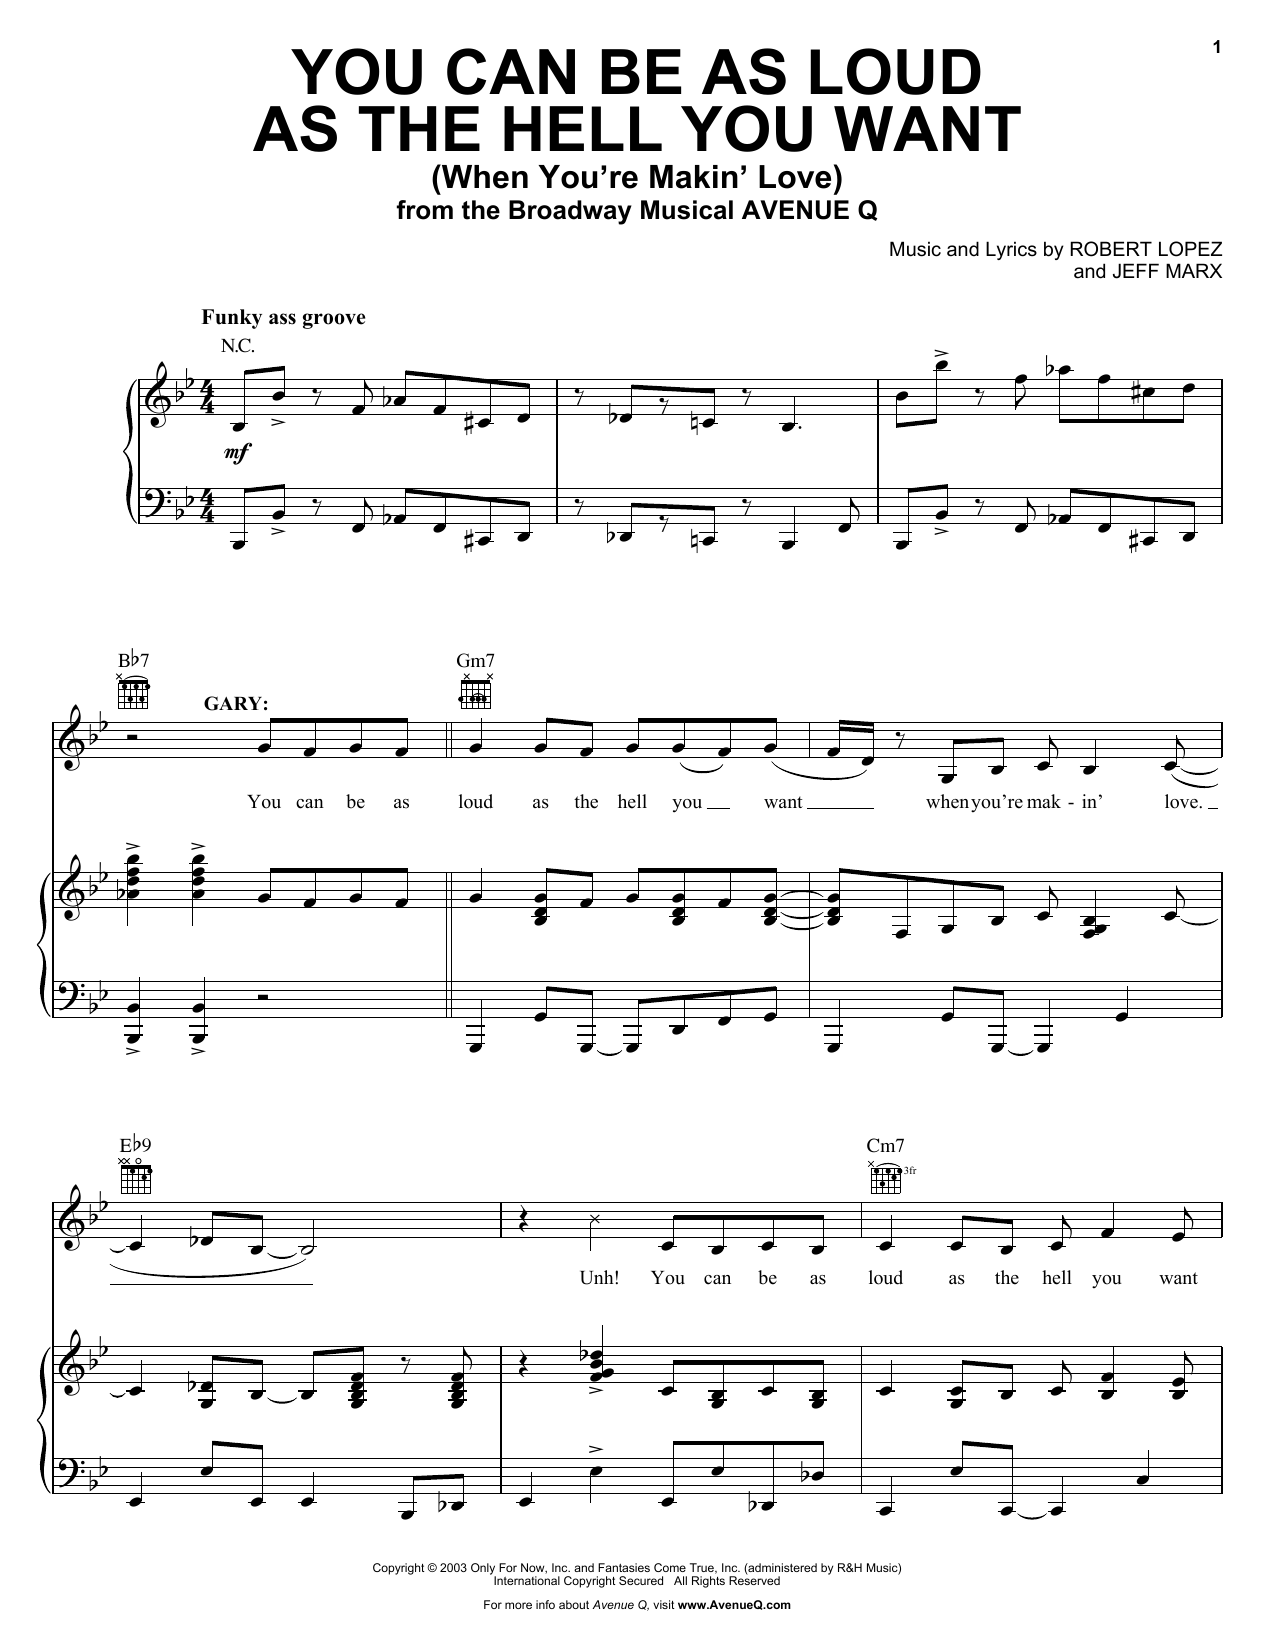 Robert Lopez & Jeff Marx You Can Be As Loud As The Hell You Want (When You're Makin' Love) (from Avenue Q) sheet music notes and chords. Download Printable PDF.